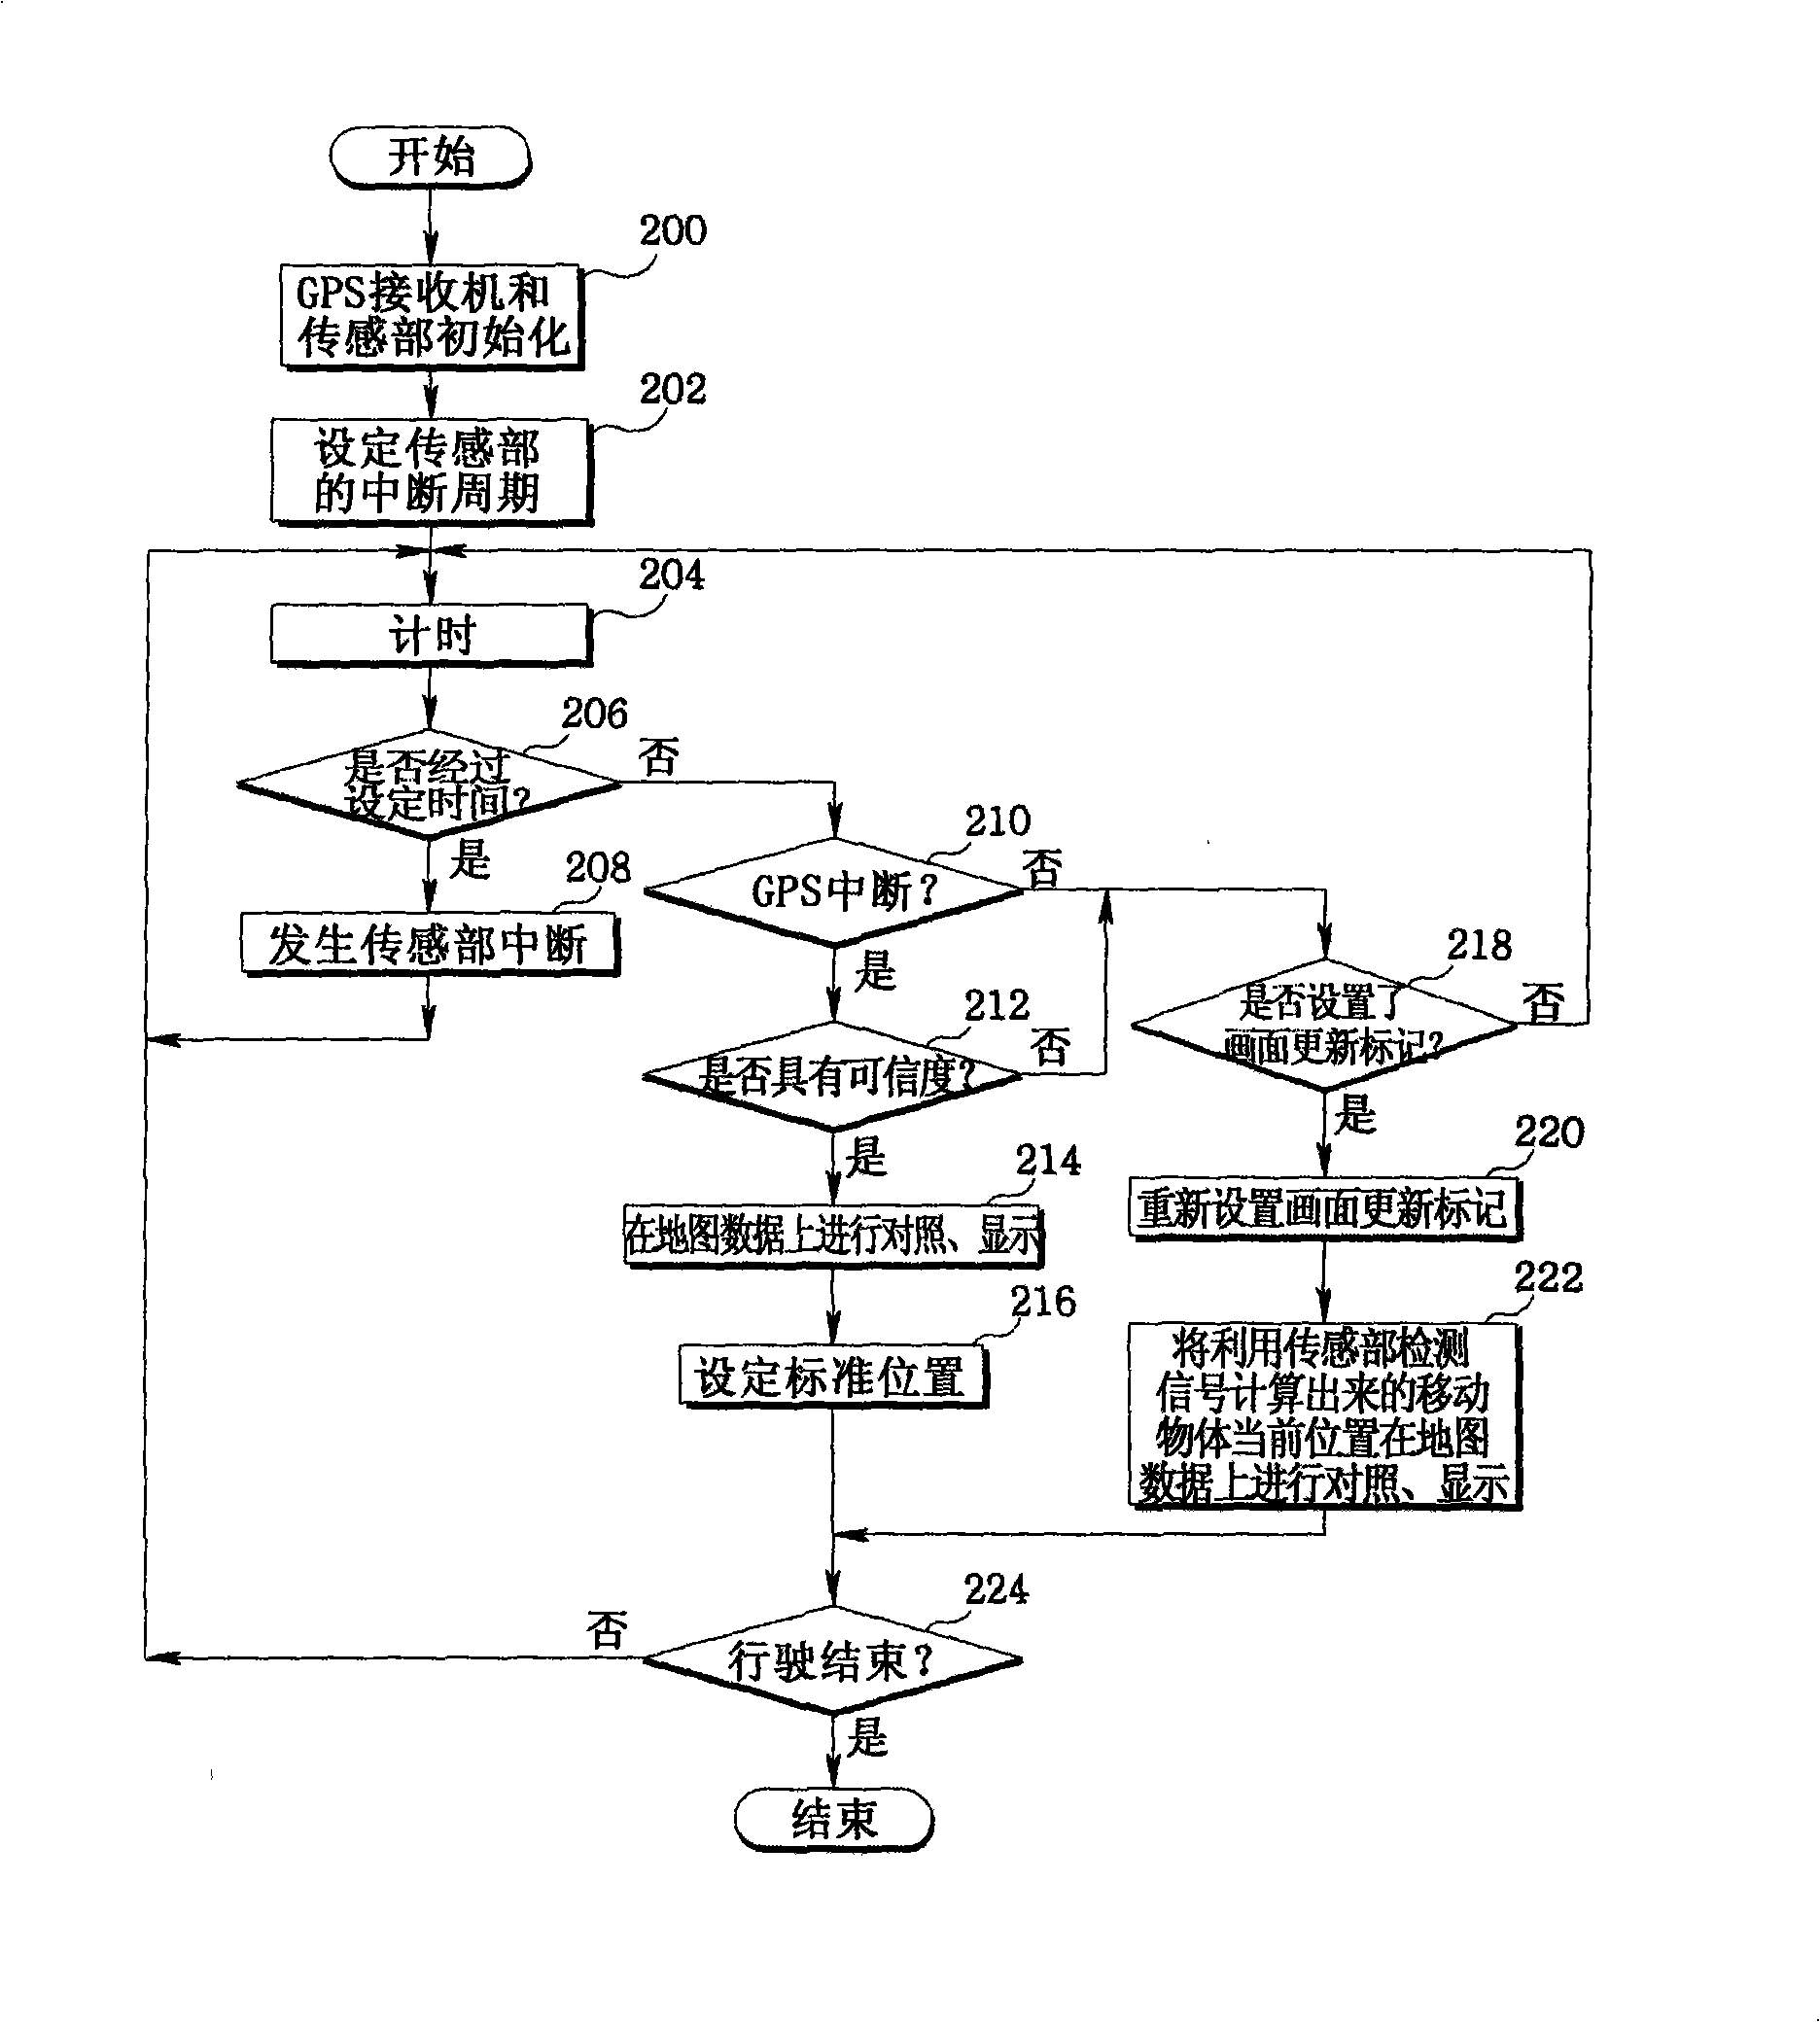 Position display updating method for mobile object in navigation system